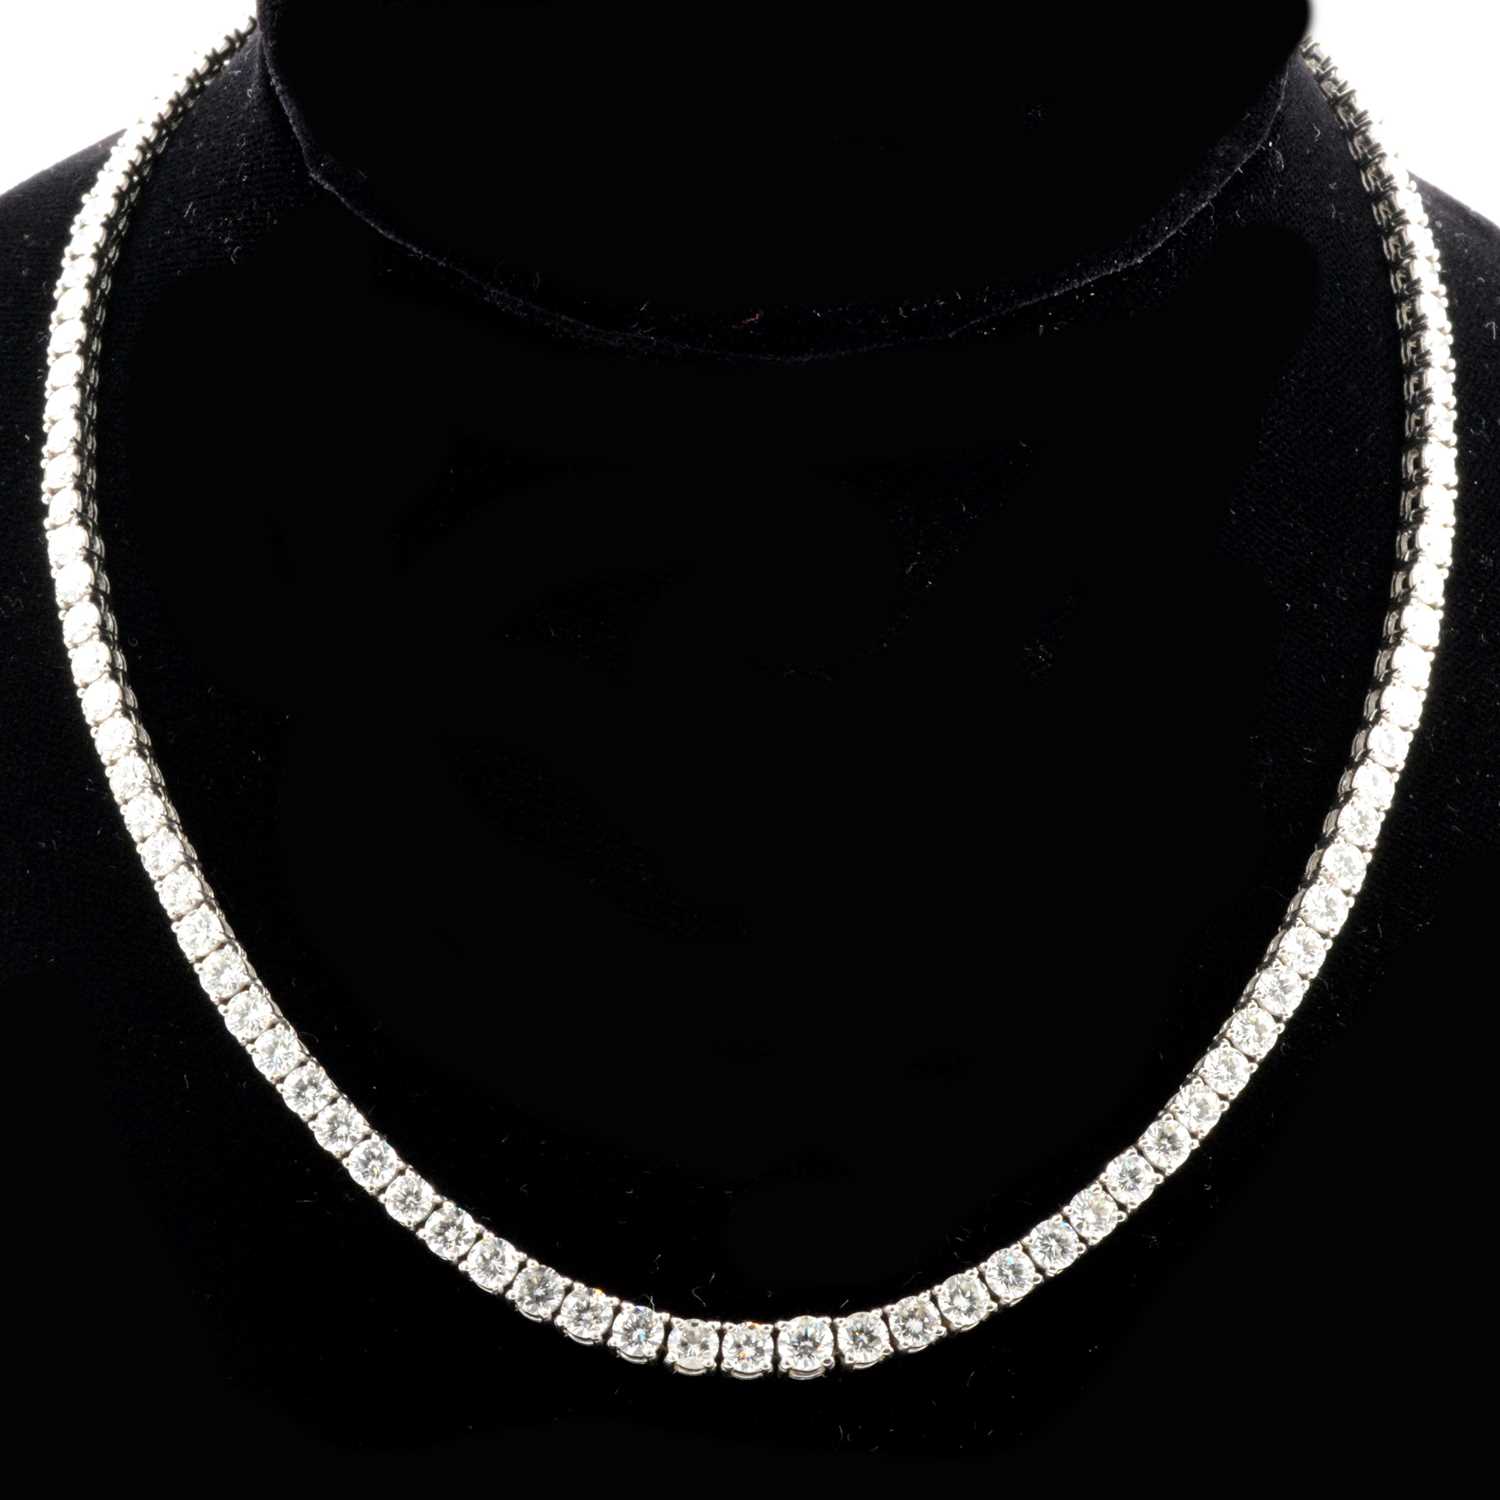 201 - A diamond Riviere necklace, approximately 20 carats.